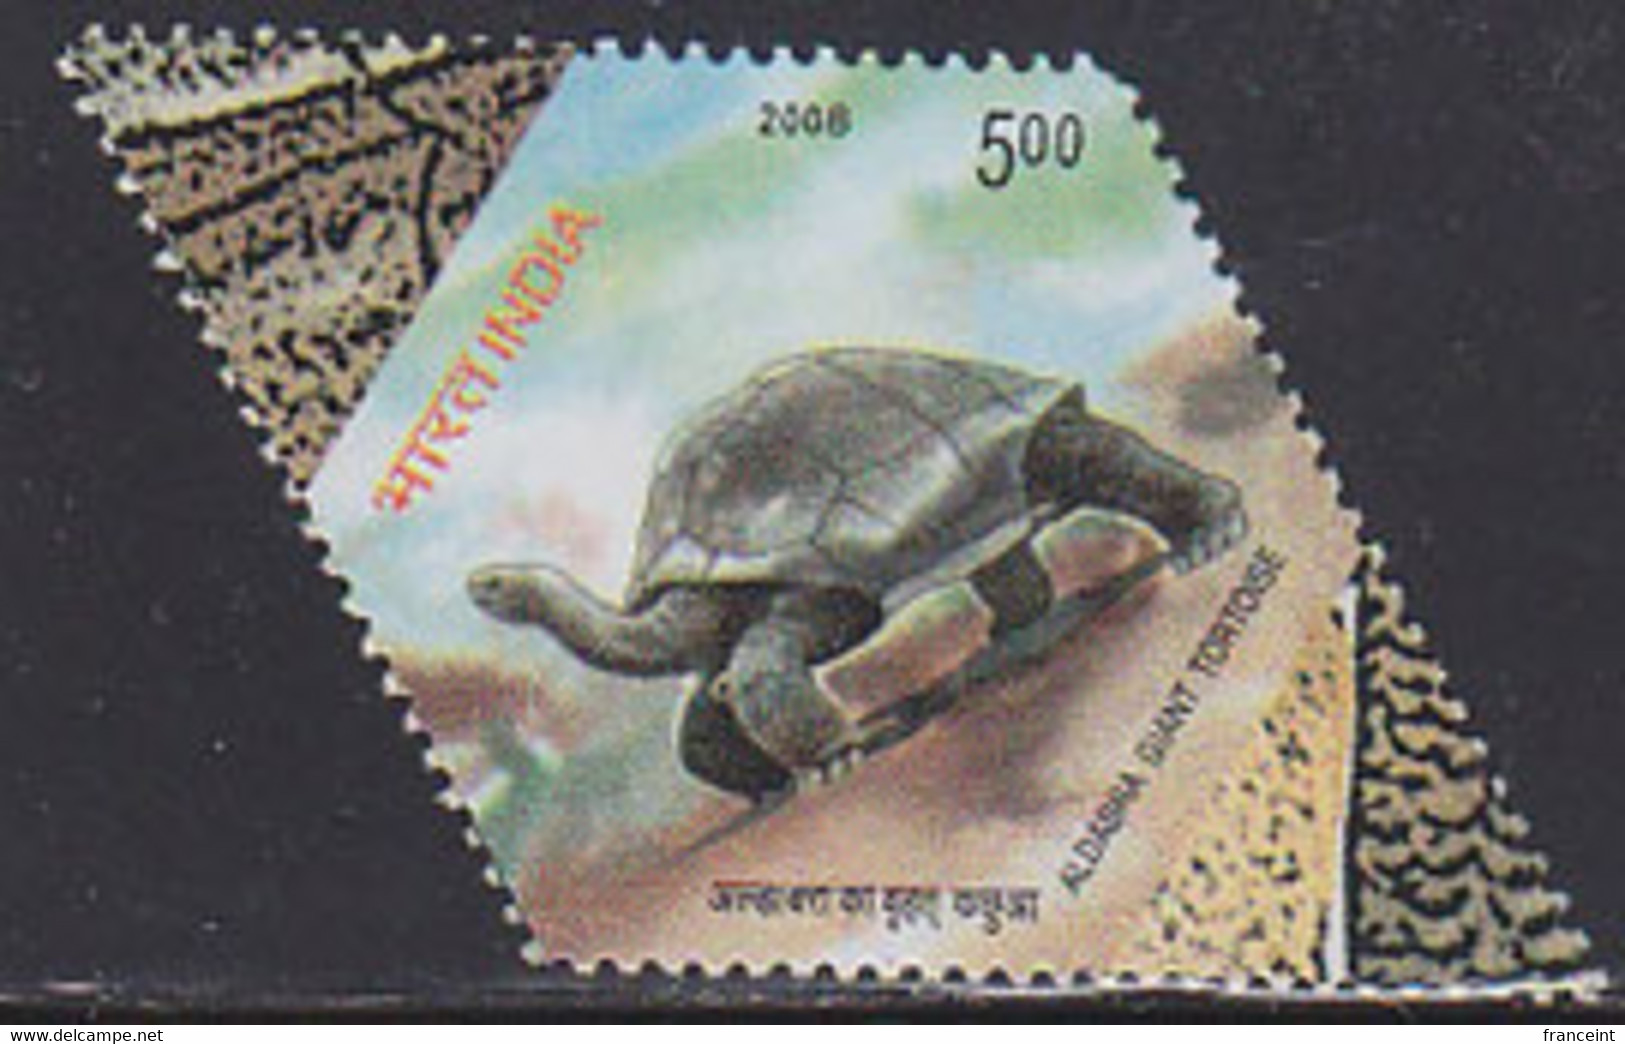 INDIA(2008) Aldabra Giant Tortoise. Hexagonal Stamp With Perforations Missing On 2 Sides - Errors, Freaks & Oddities (EFO)